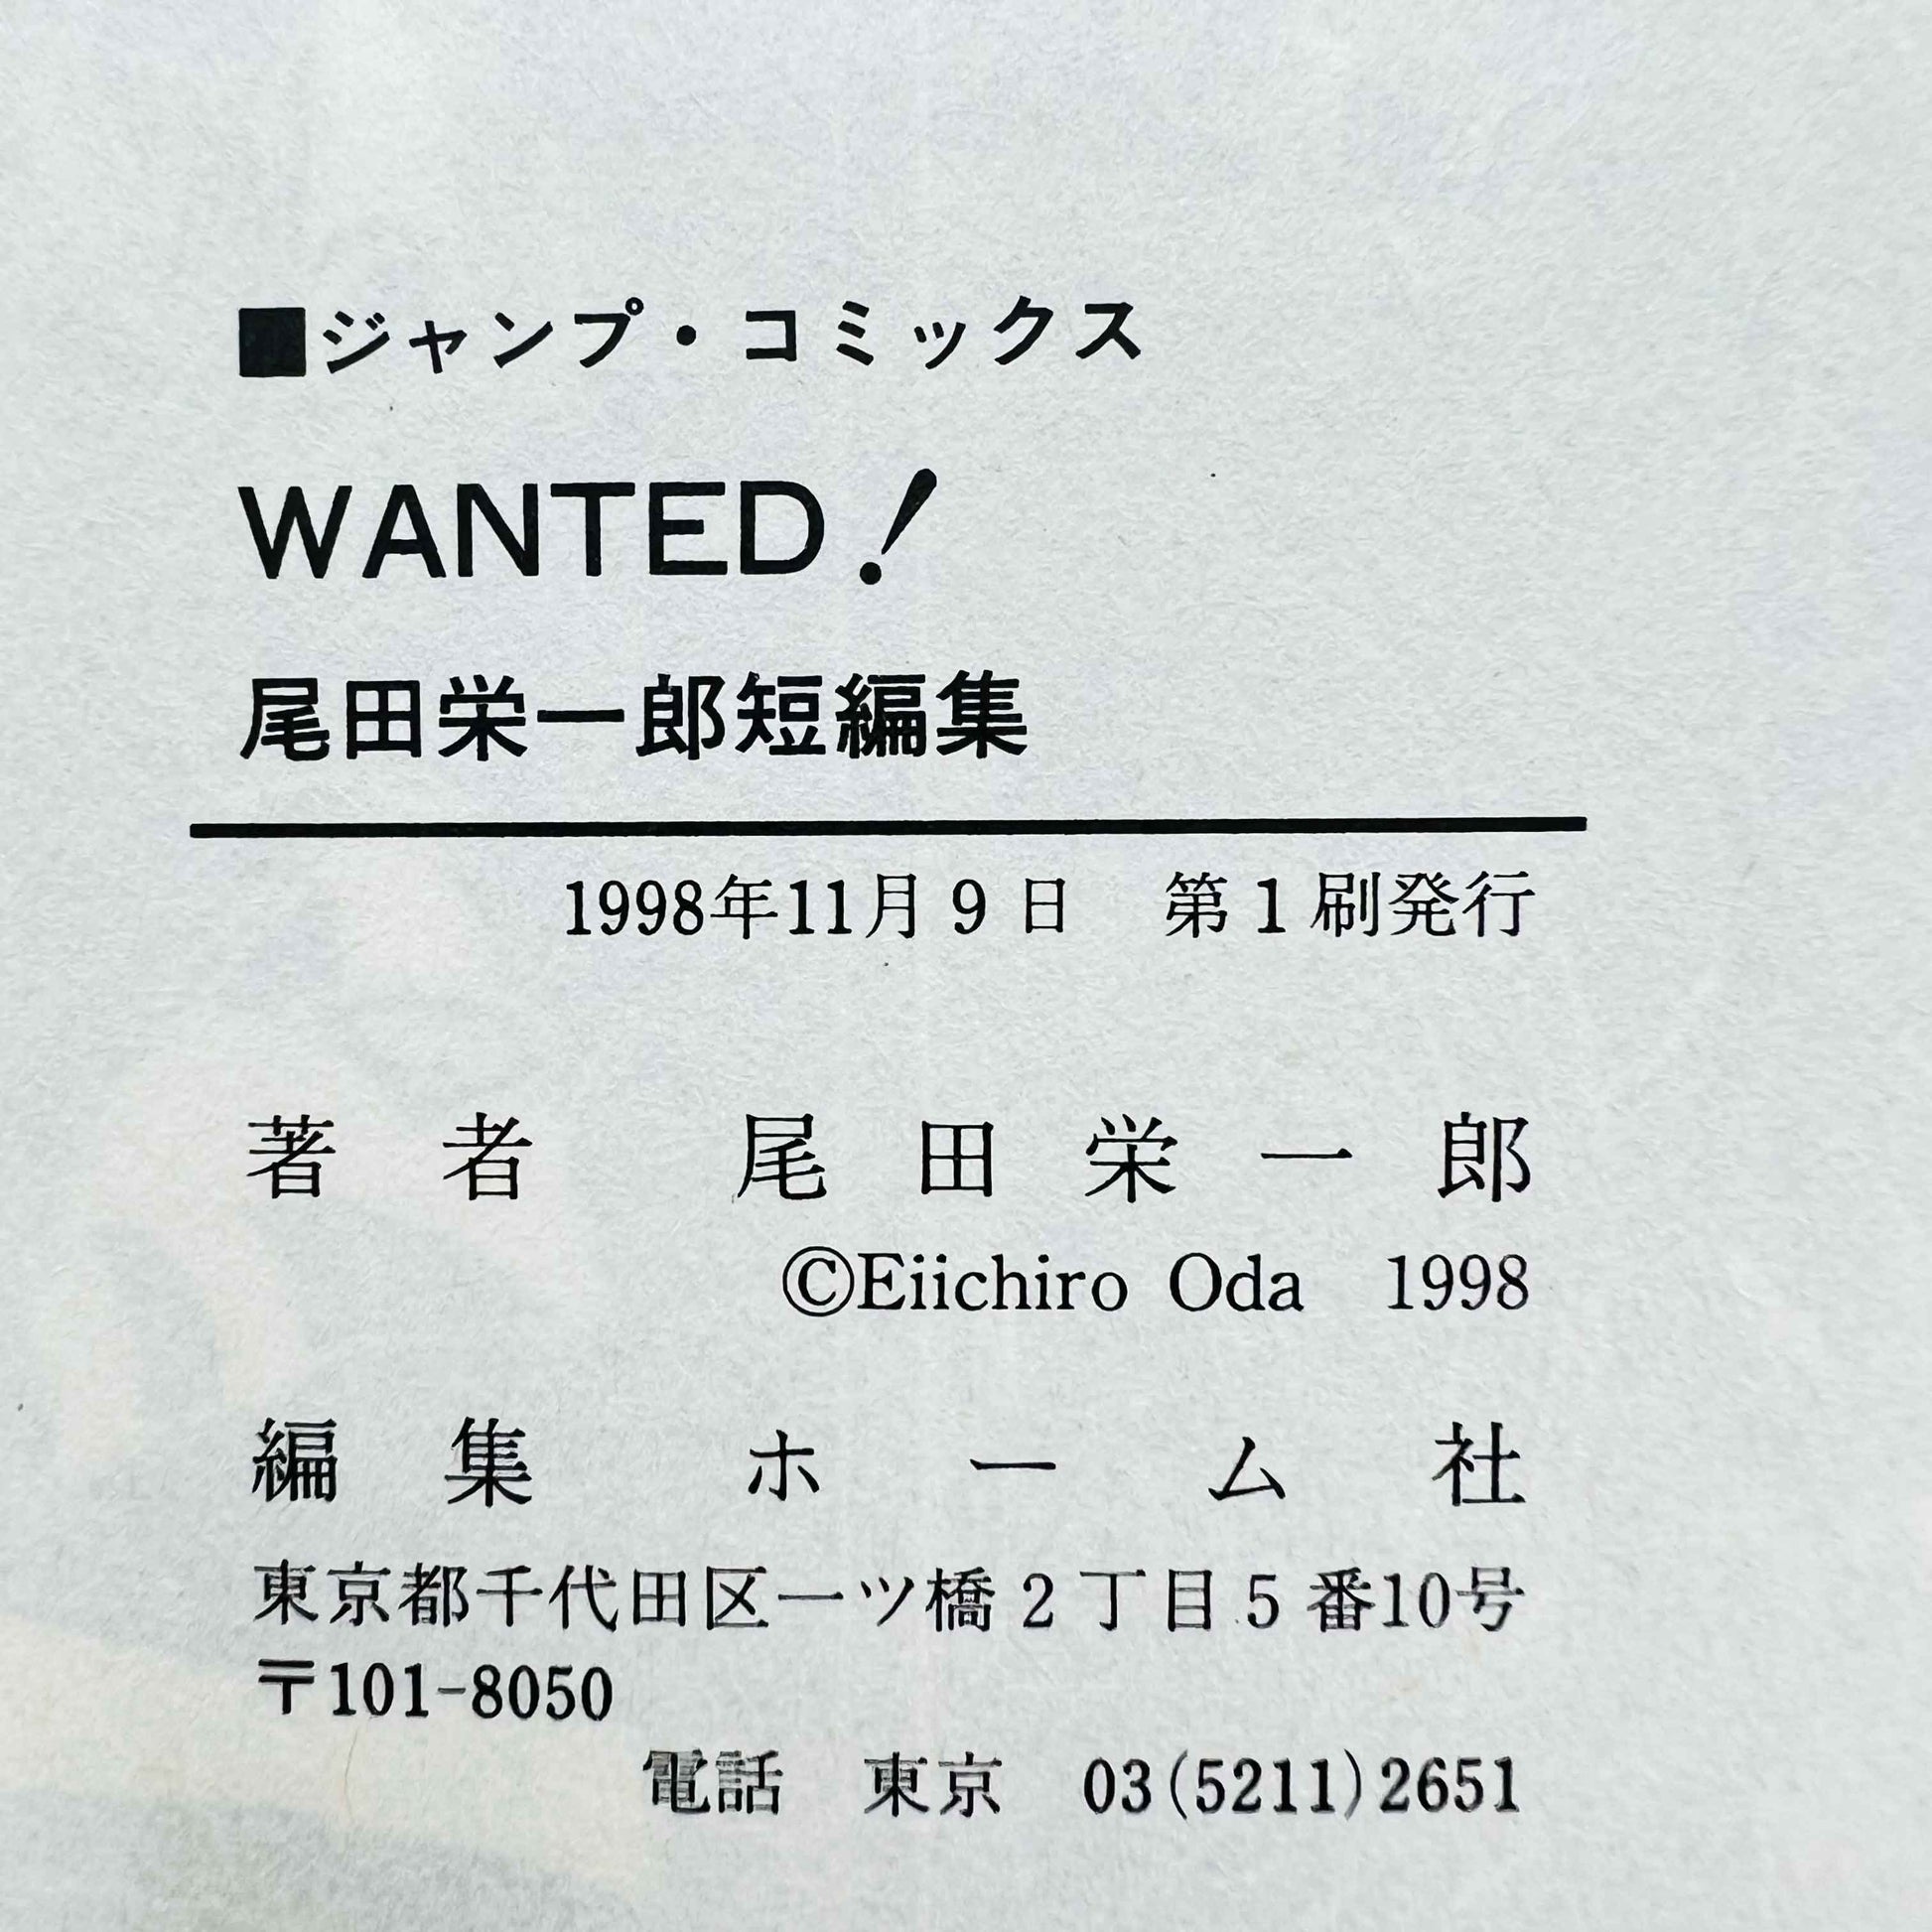 「Wish - Reserved」One Piece Wanted - 1stPrint.net - 1st First Print Edition Manga Store - M-OPWANTED-01-001